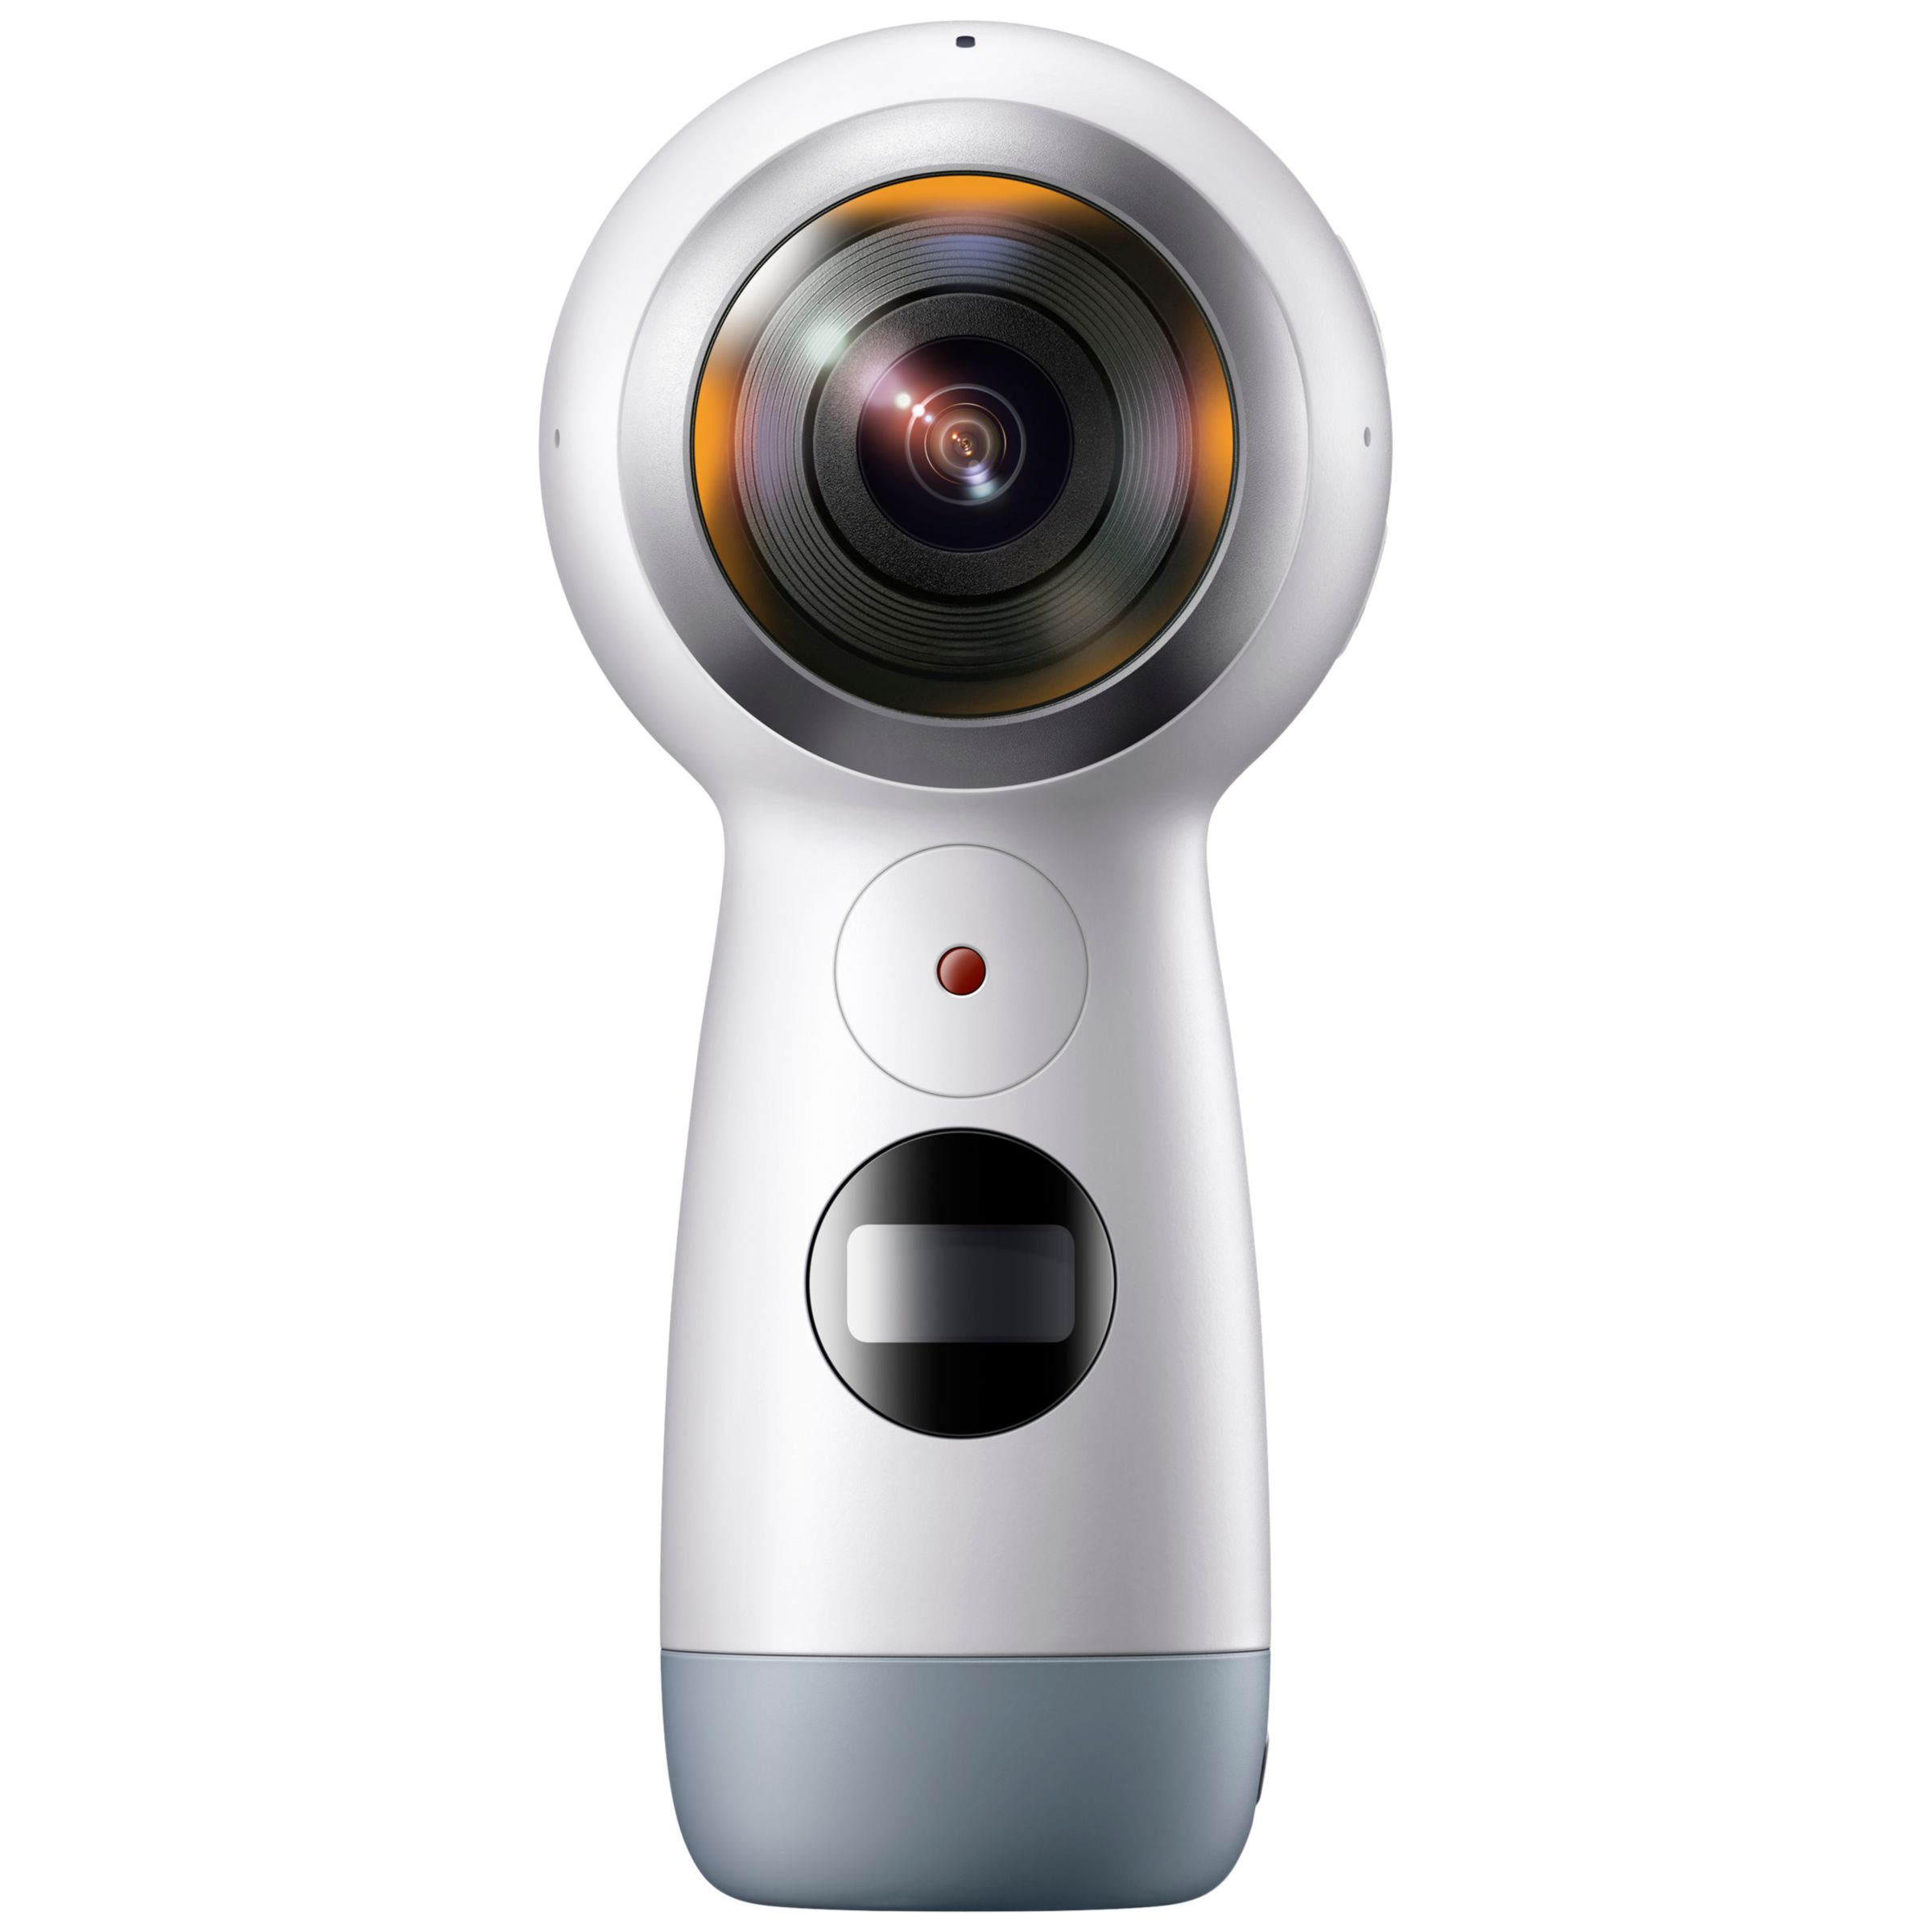 Samsung Gear 360 2017 Action Camcorder, 360° Recording, 4K UHD, Wi-Fi, Bluetooth, Dust & Splash Resistant Review thumbnail